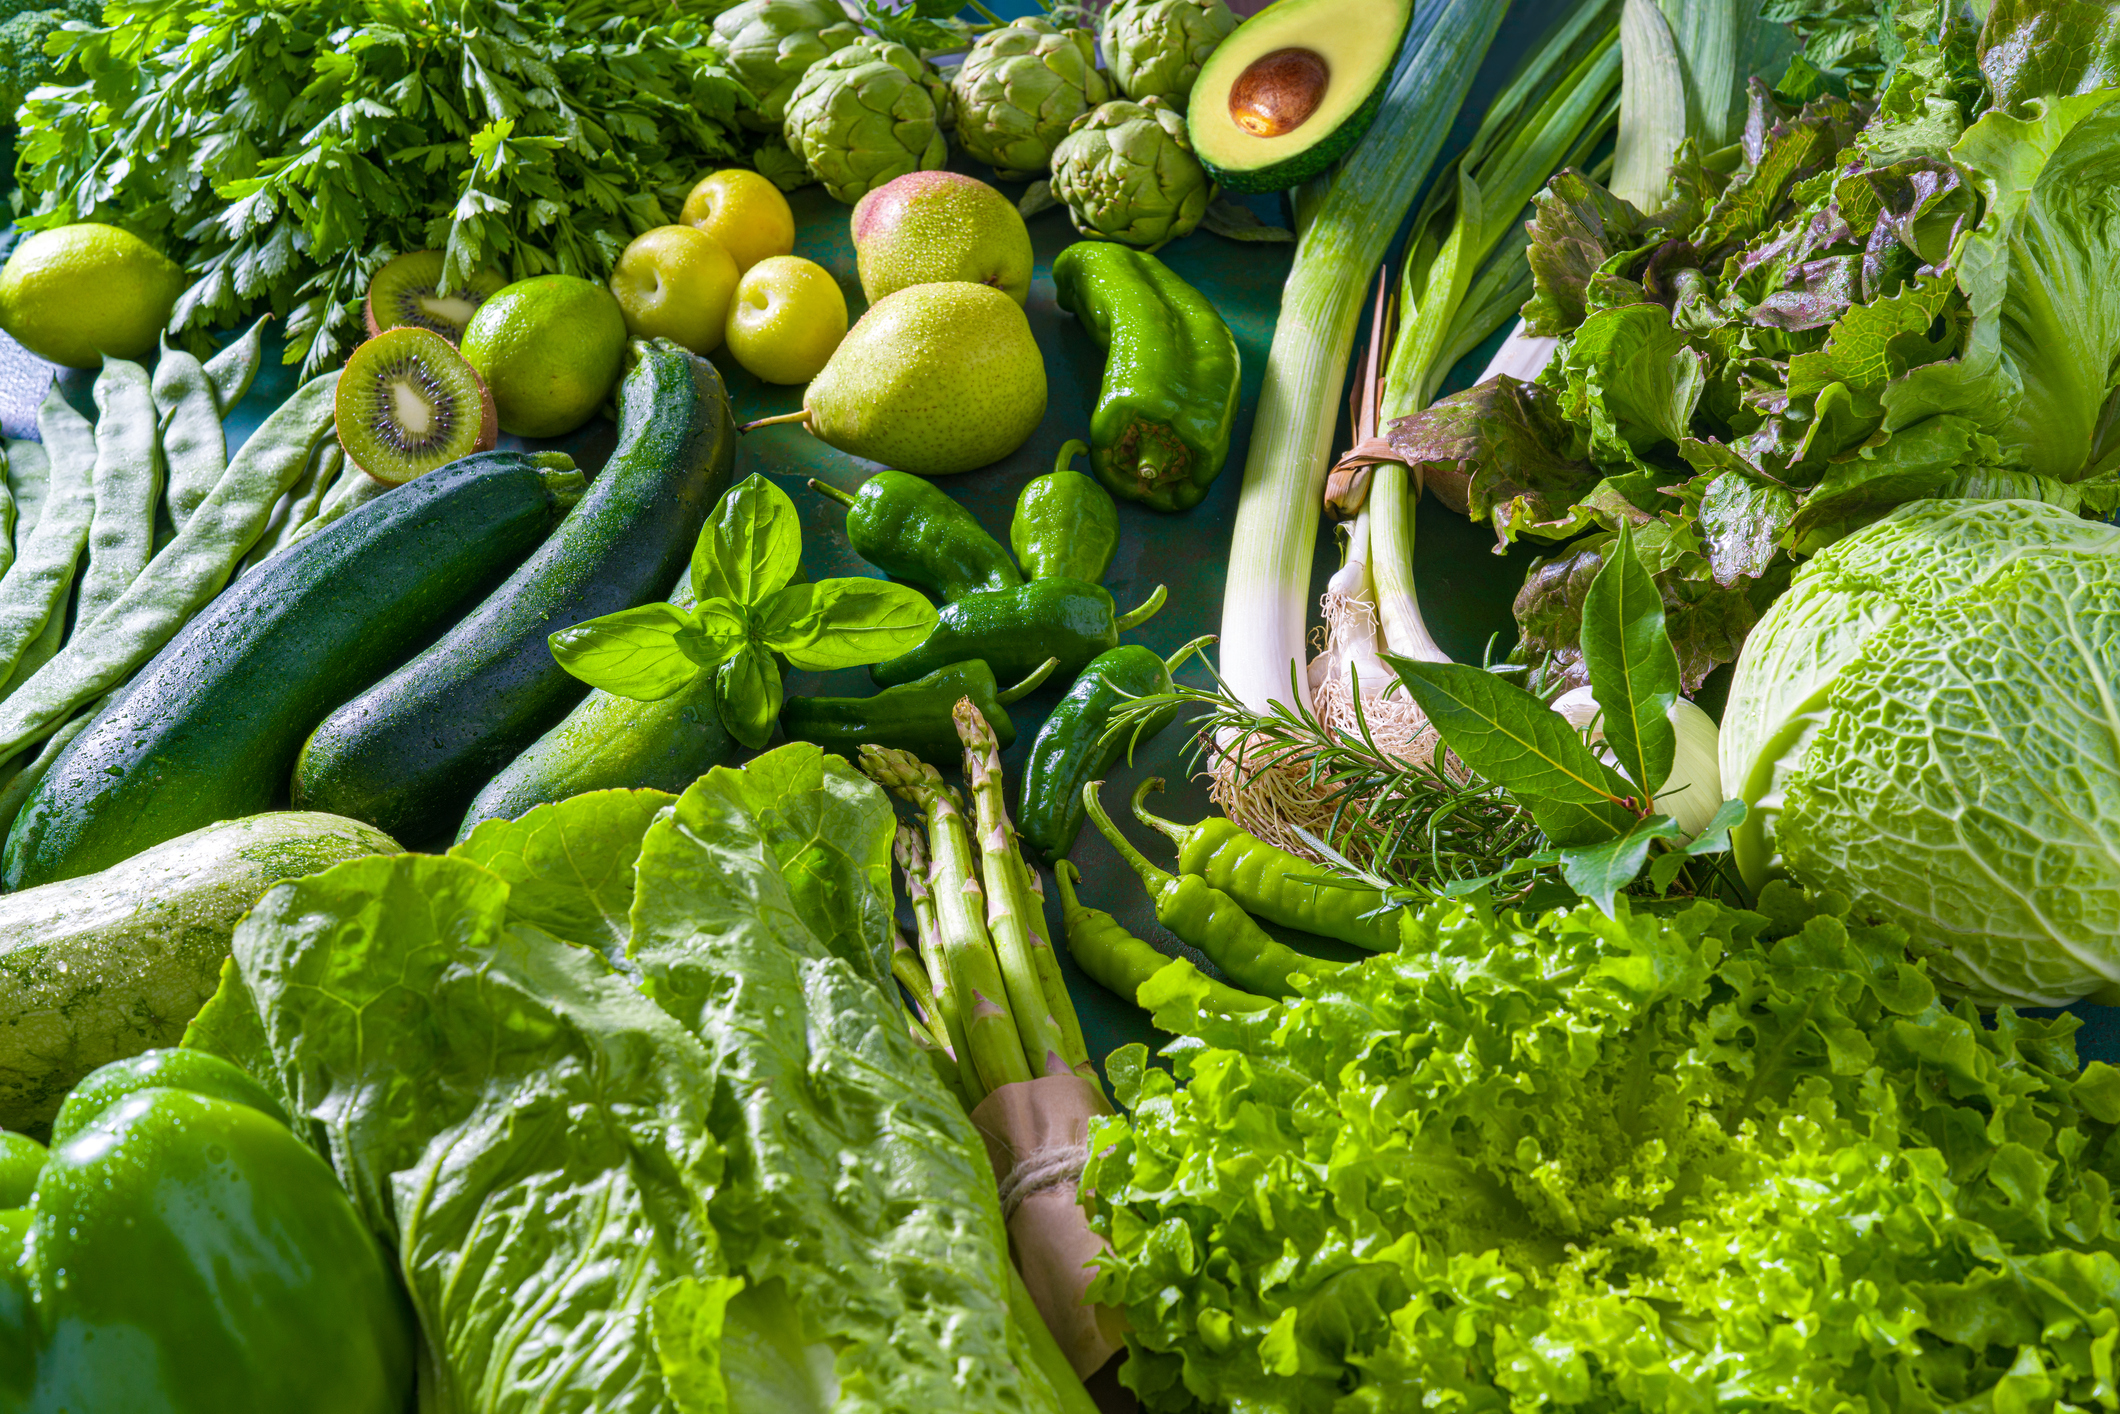 Pile of green vegetables including avocado, lettuce, kale and more